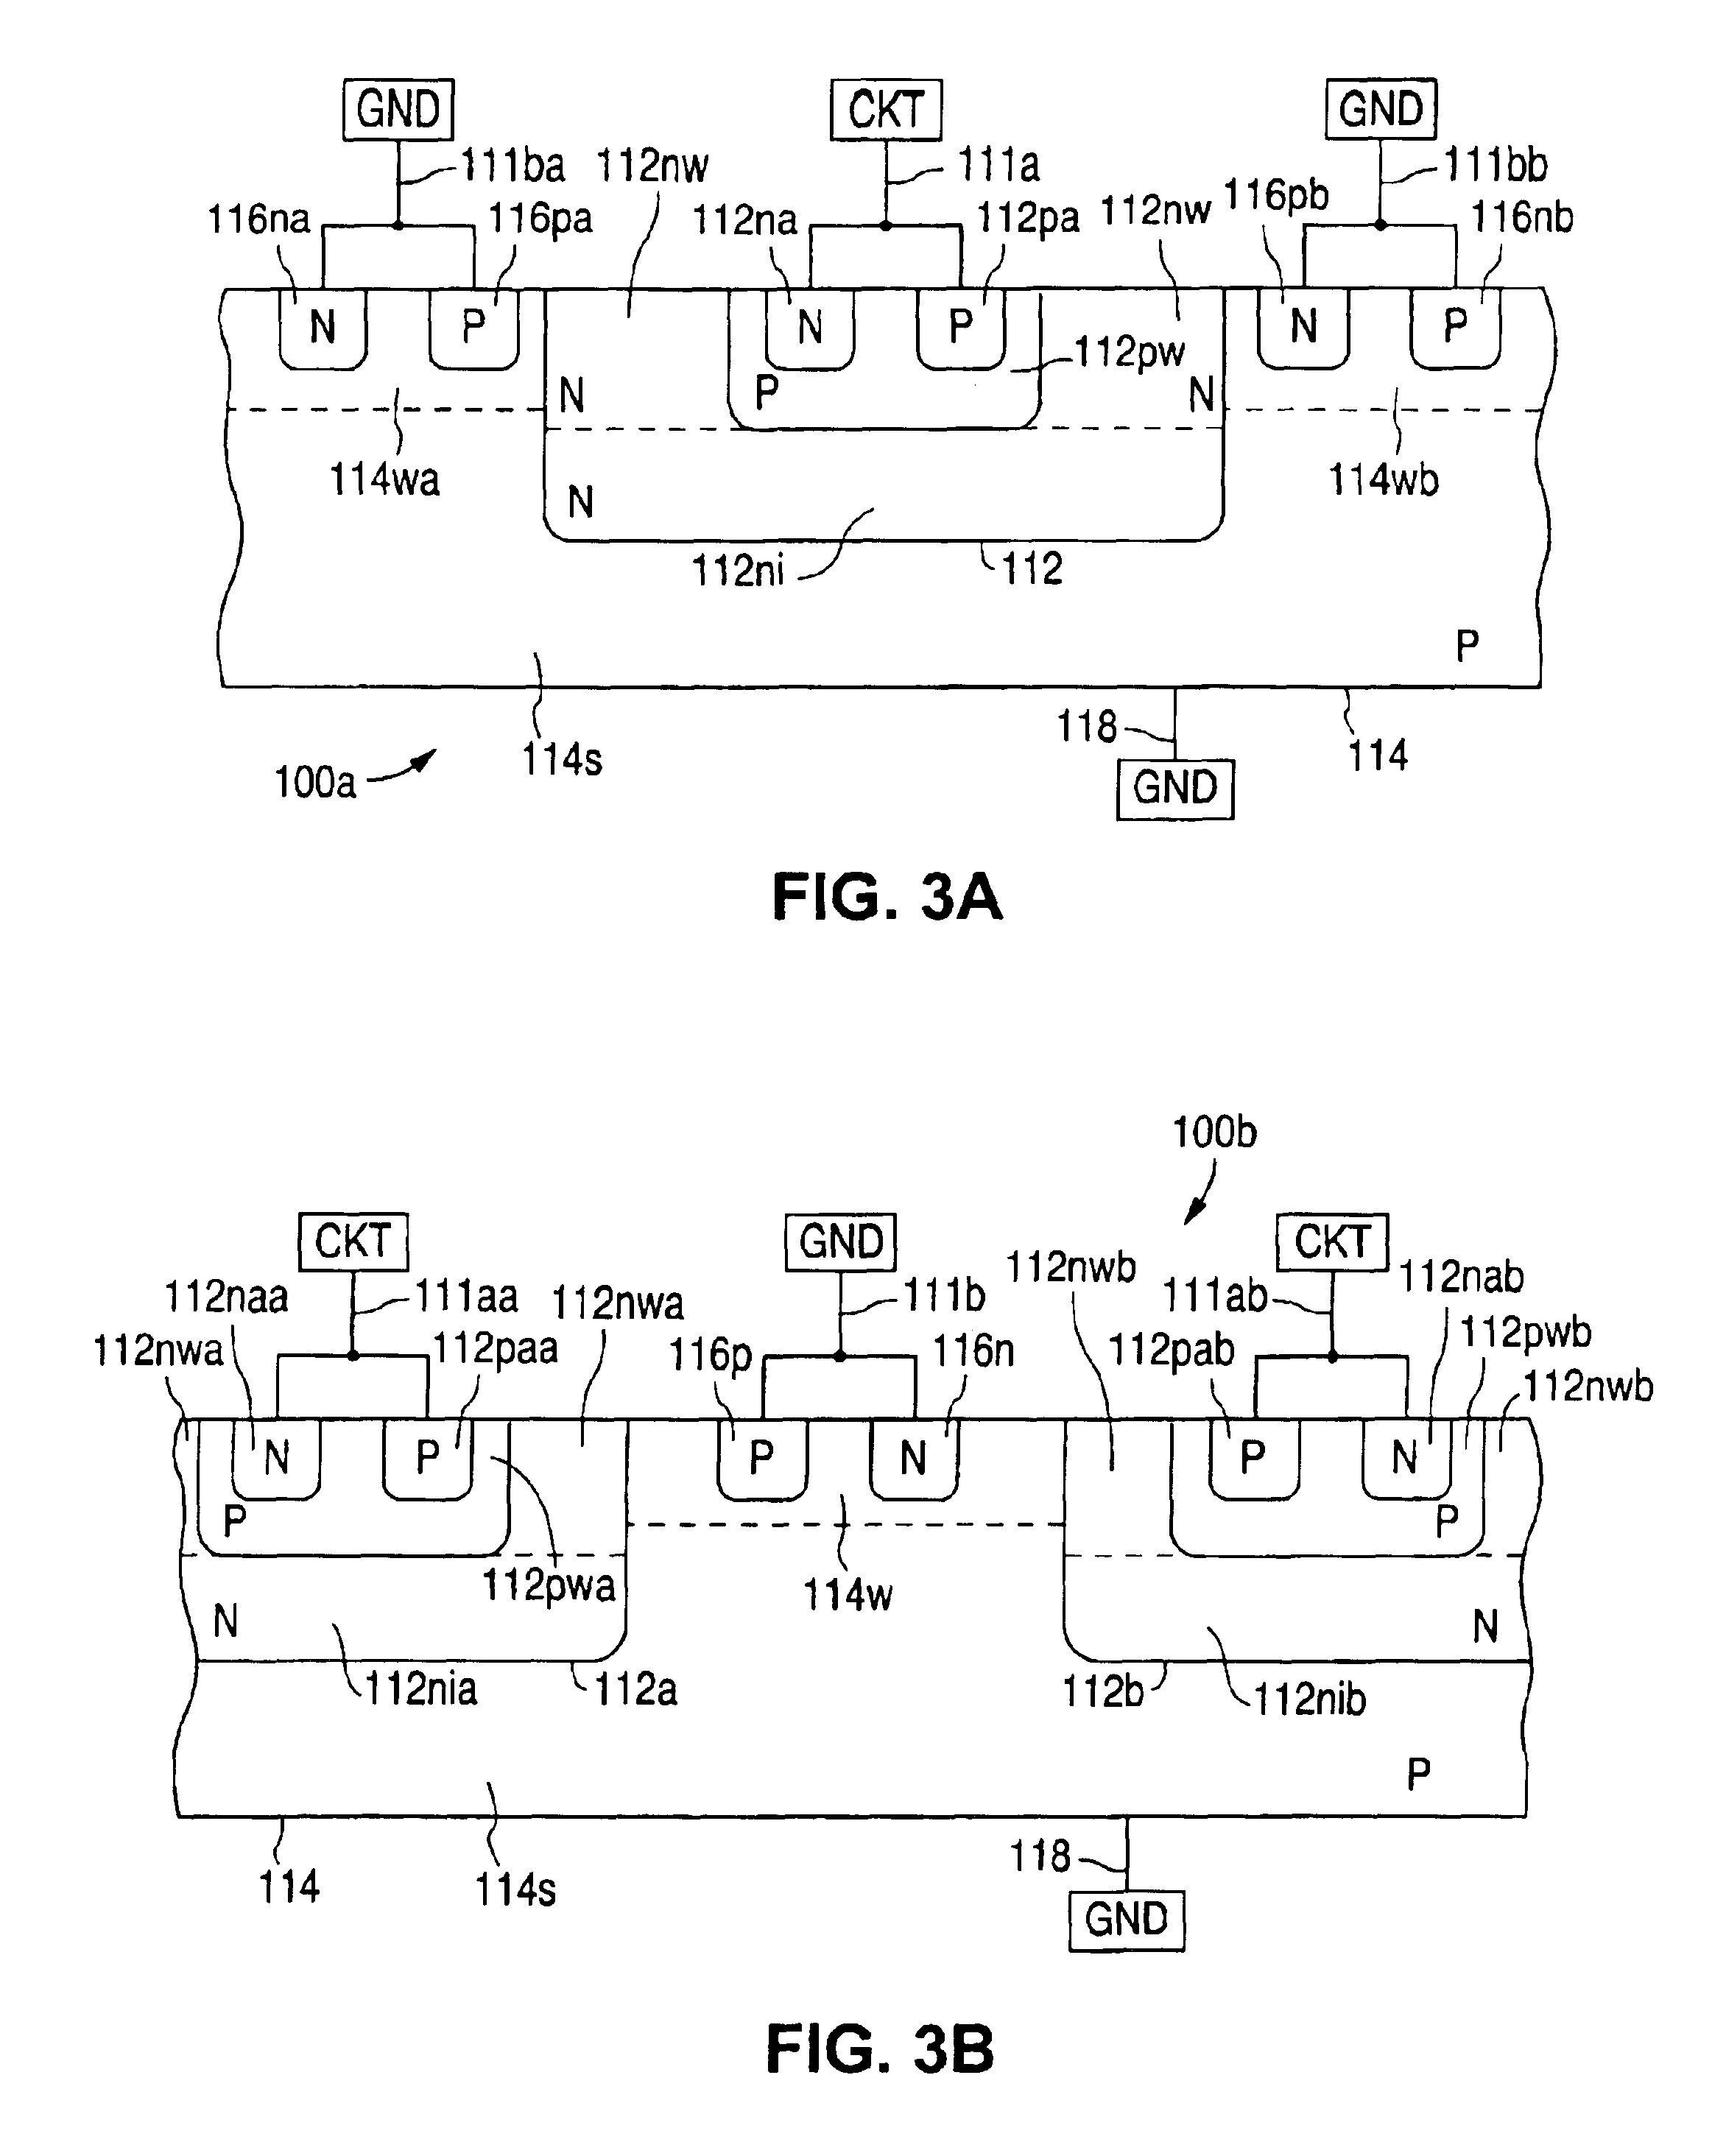 Electrostatic discharge (ESD) protection structure with symmetrical positive and negative ESD protection